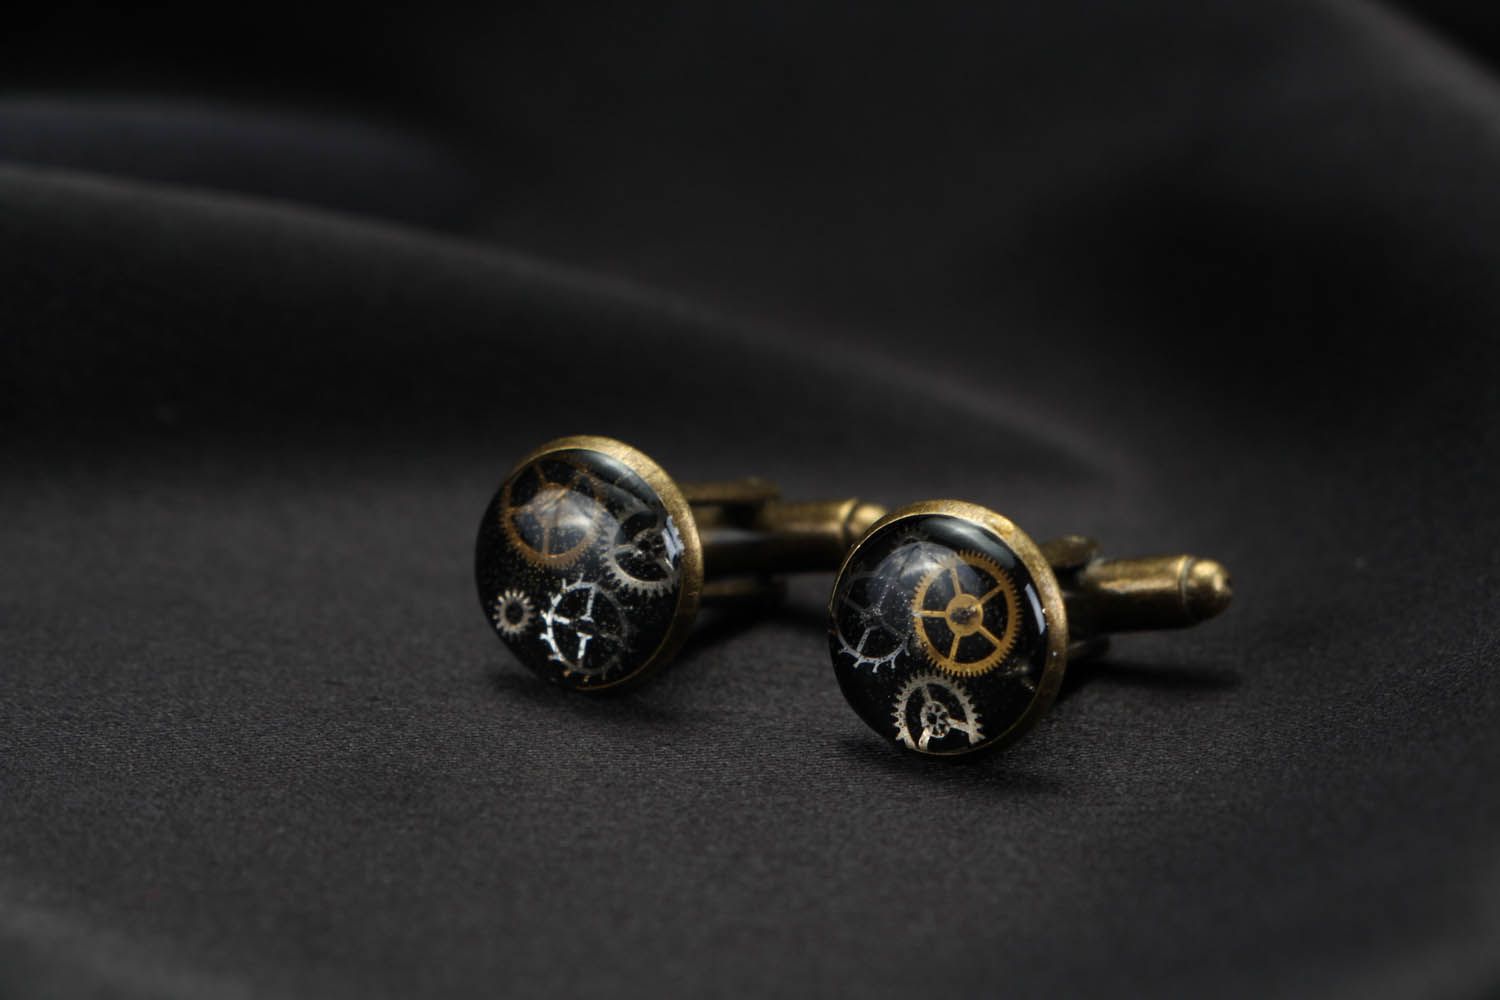 Cuff links with watch details in steam punk style photo 2